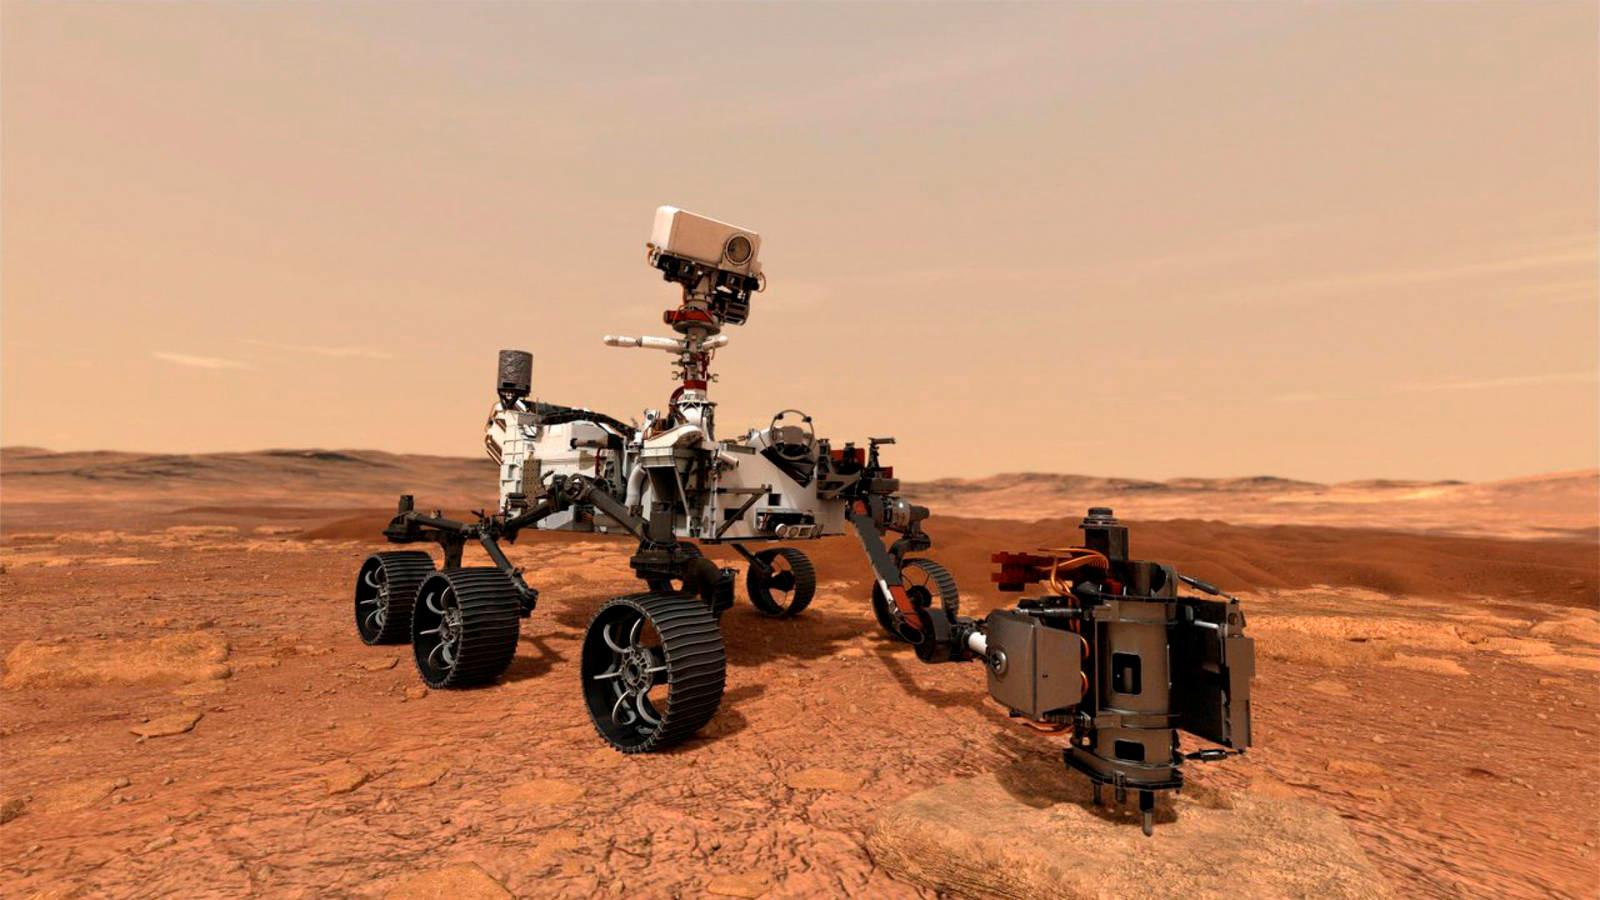 The diligent rover travels its first meter to the surface of Mars